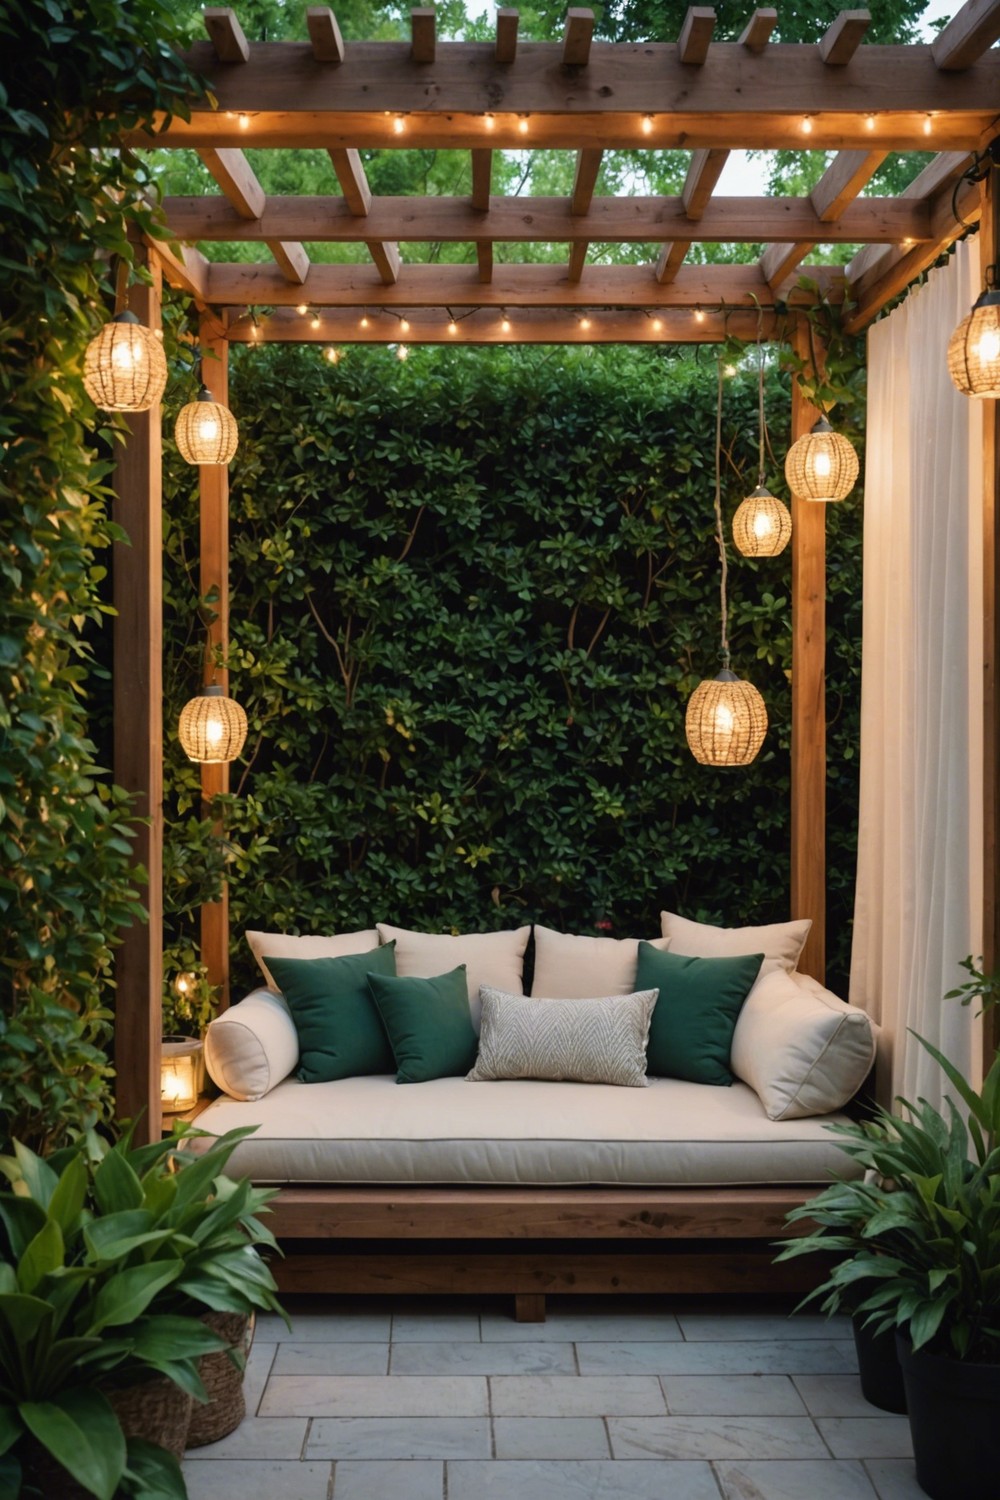 Pergola with Built-in Daybed for Relaxation